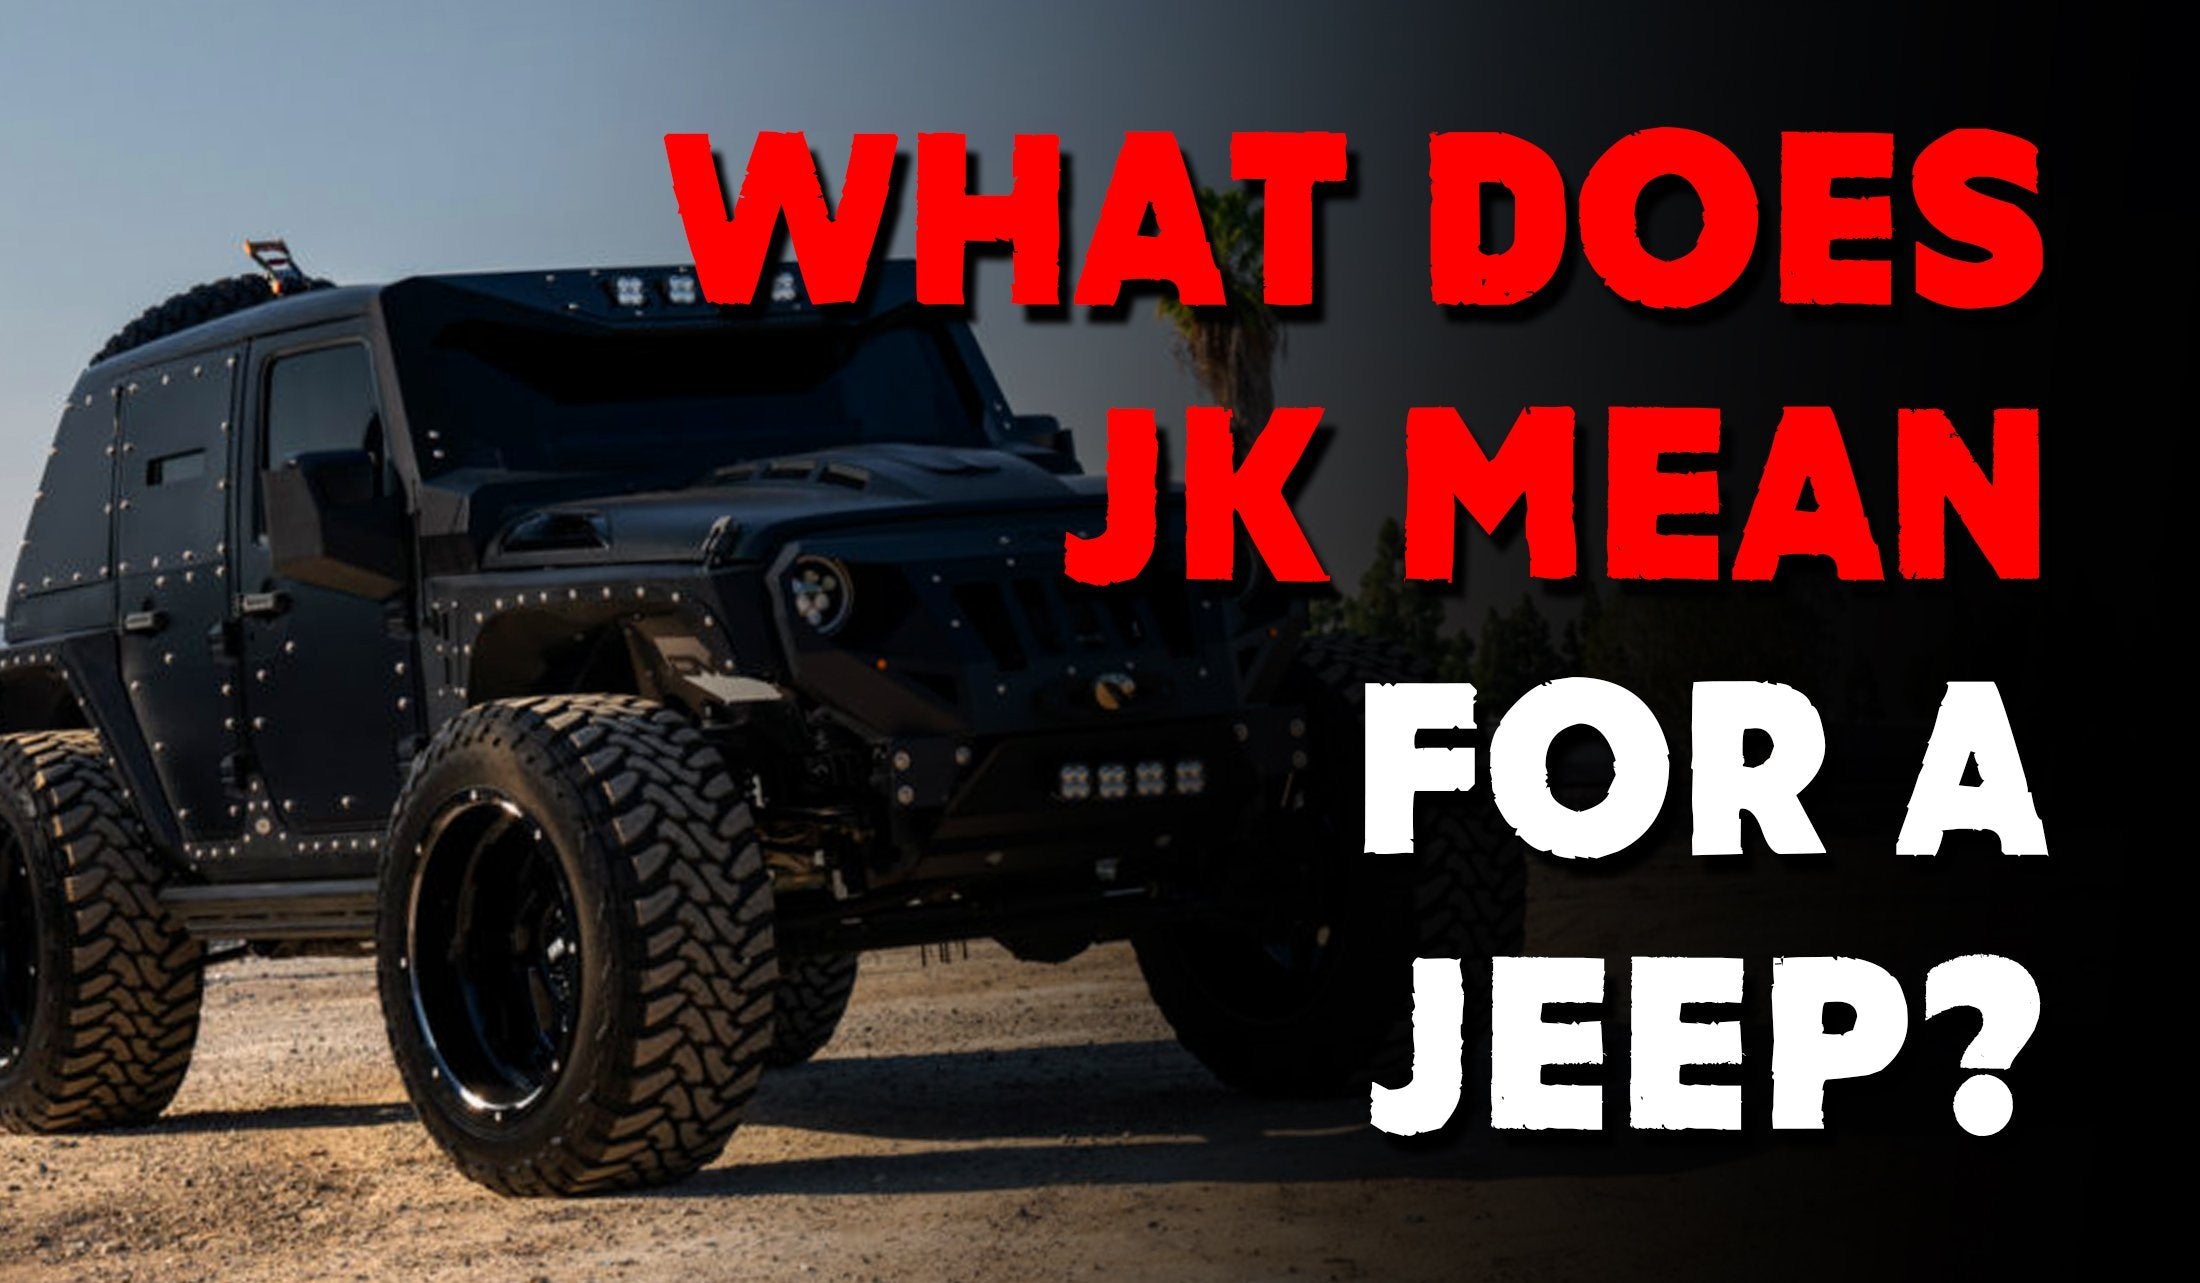 What Does JK Mean For a Jeep?